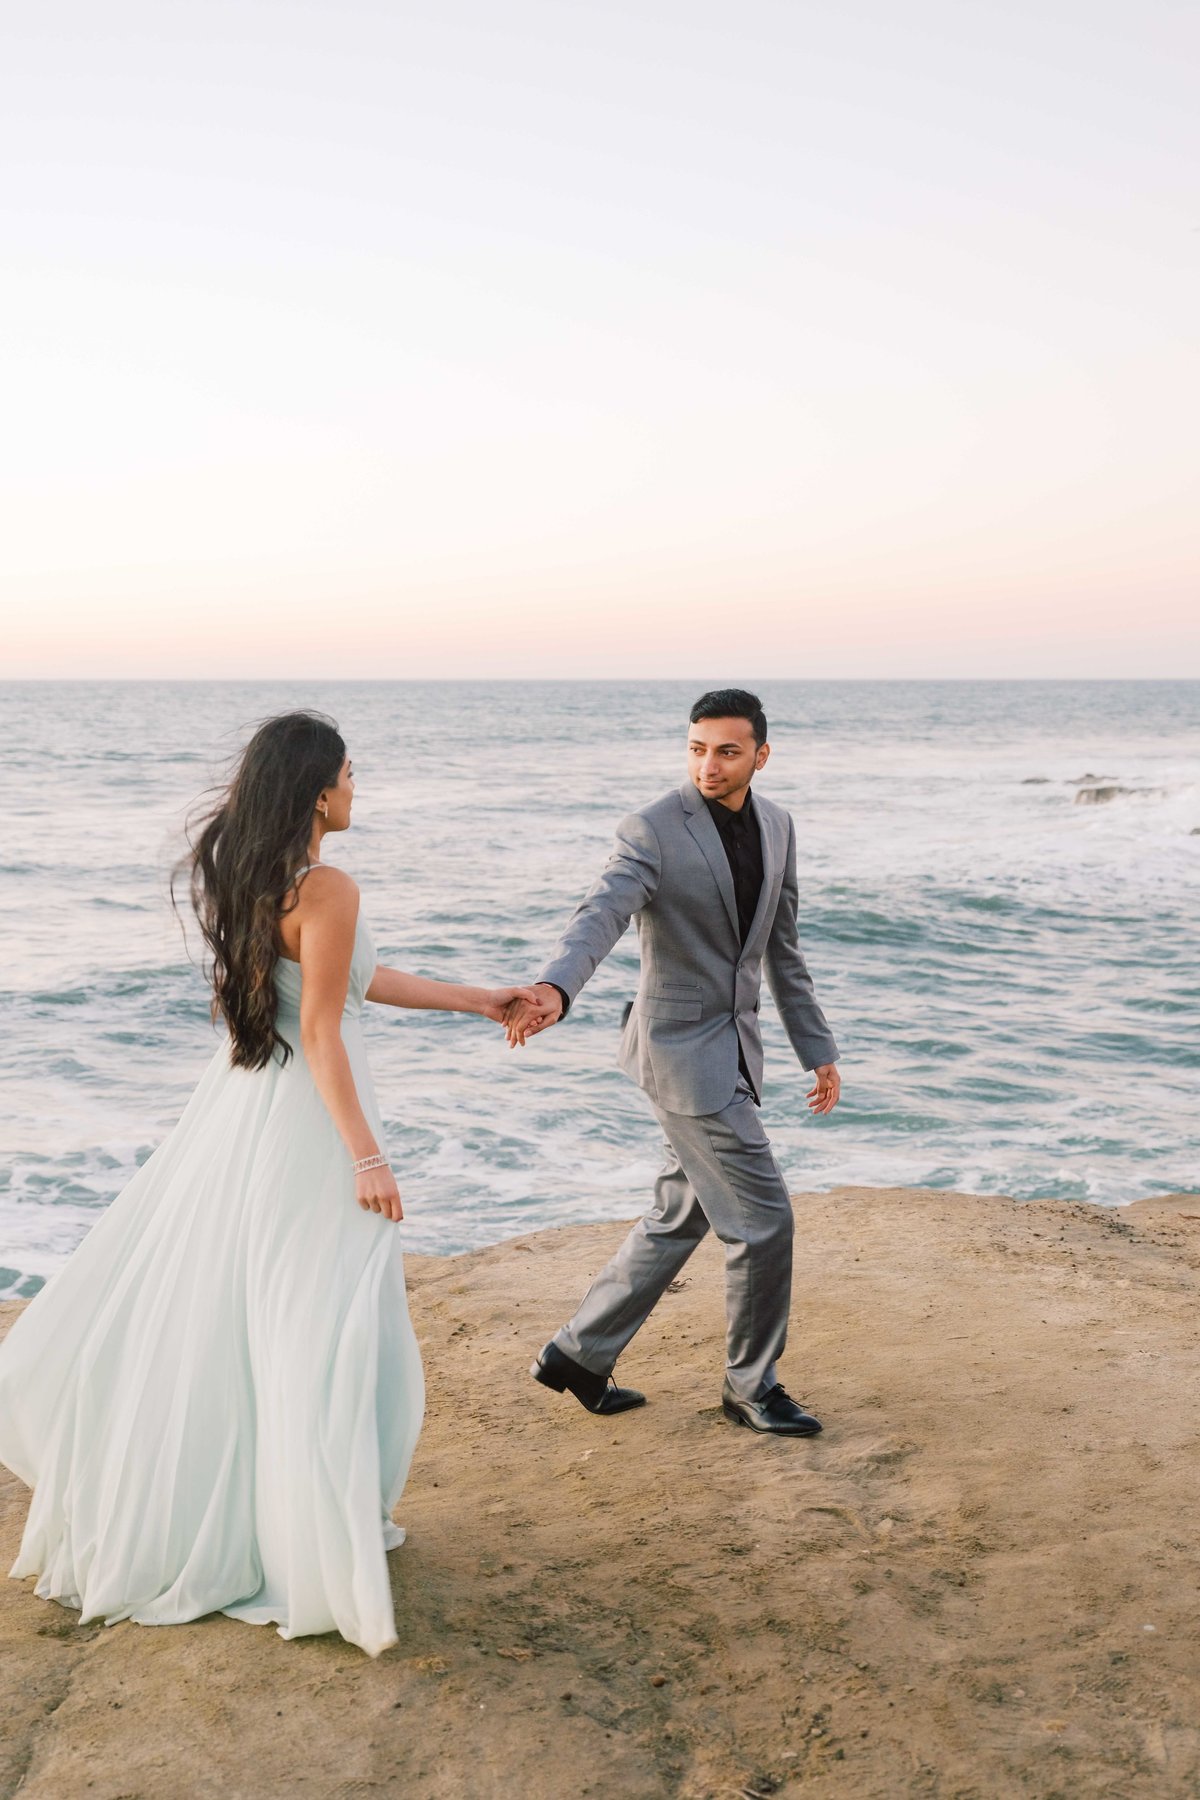 Babsie-Ly-Photography-San-Diego-Proposal-Engagement-Sunset-Cliffs-Indian-Couple-Dog-Surprise-007